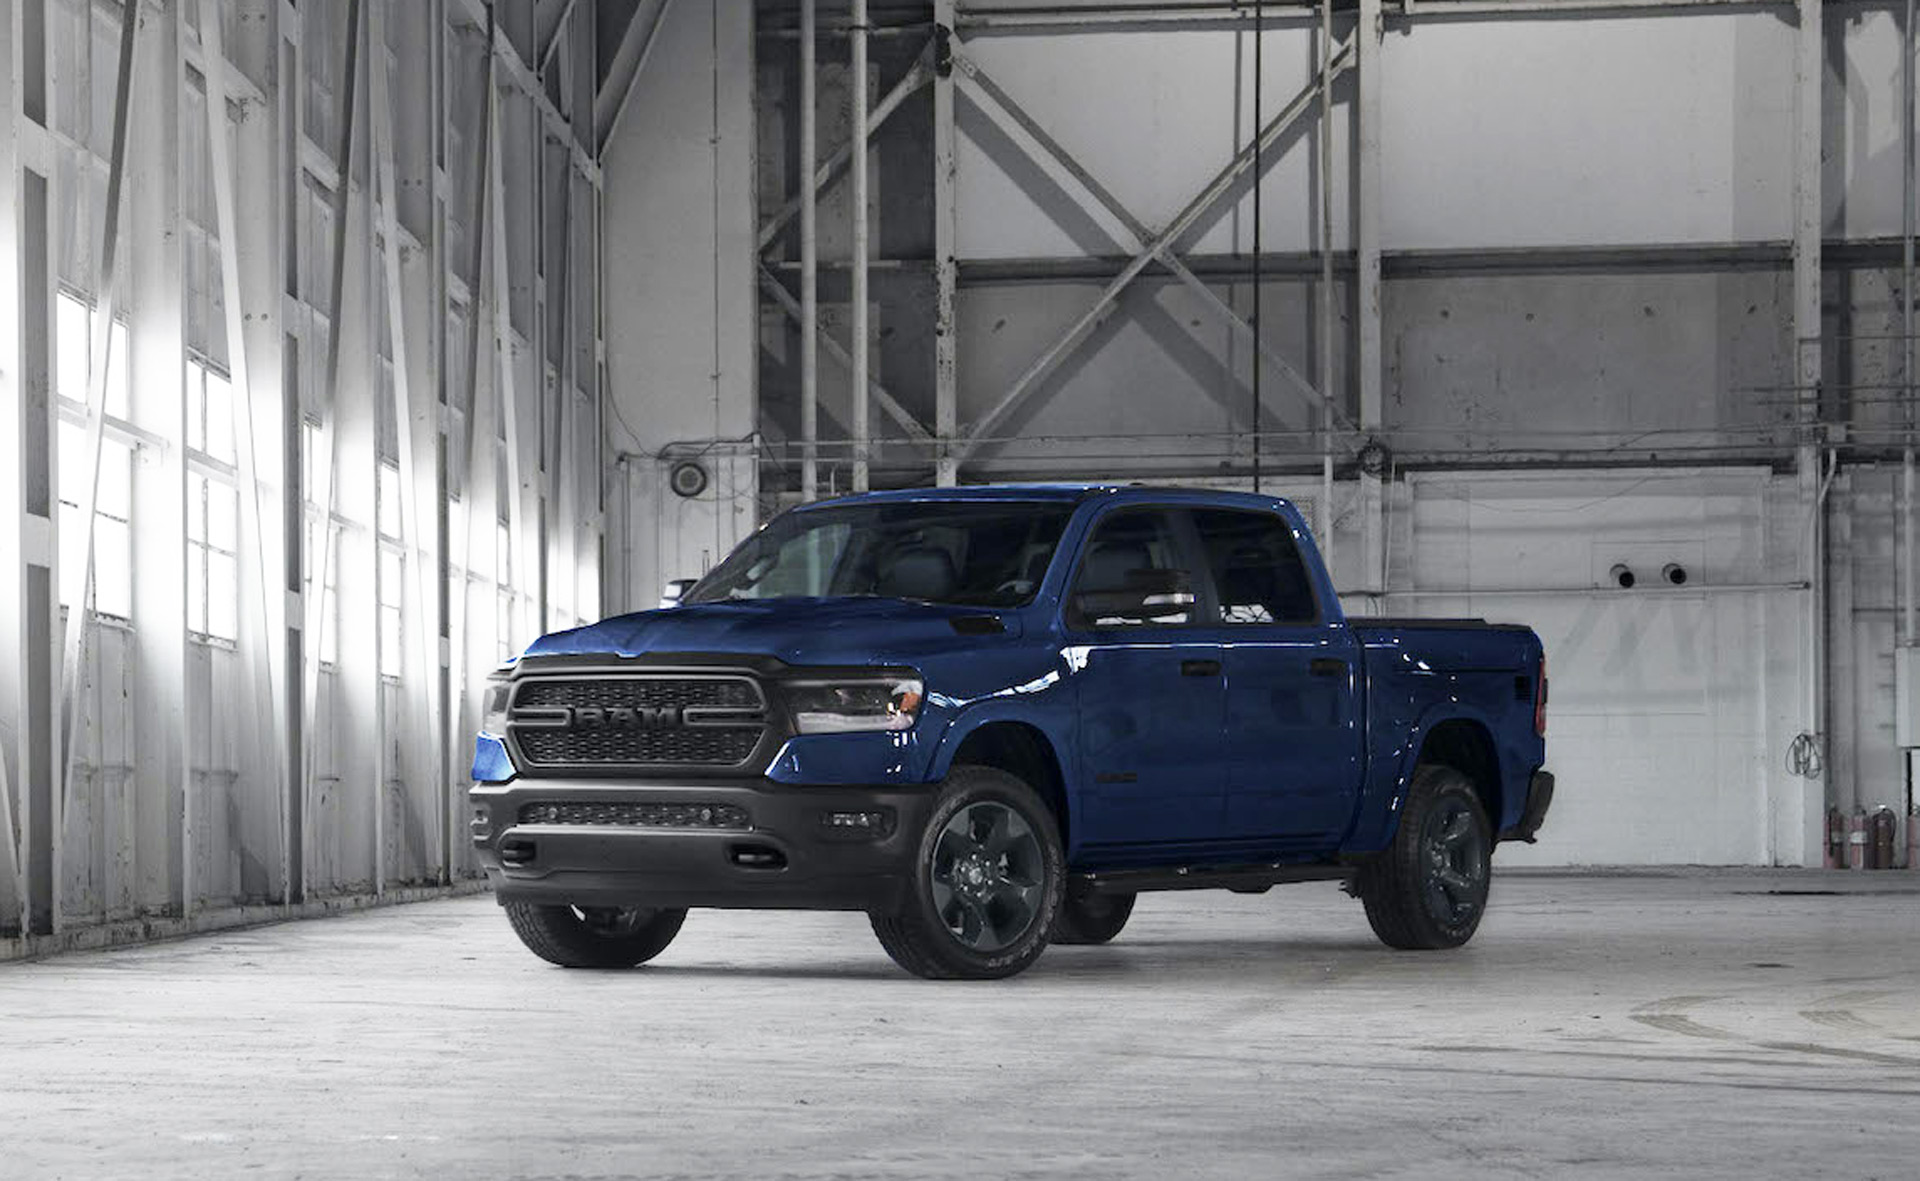 2020 Ram 1500 Review, Pricing, and Specs